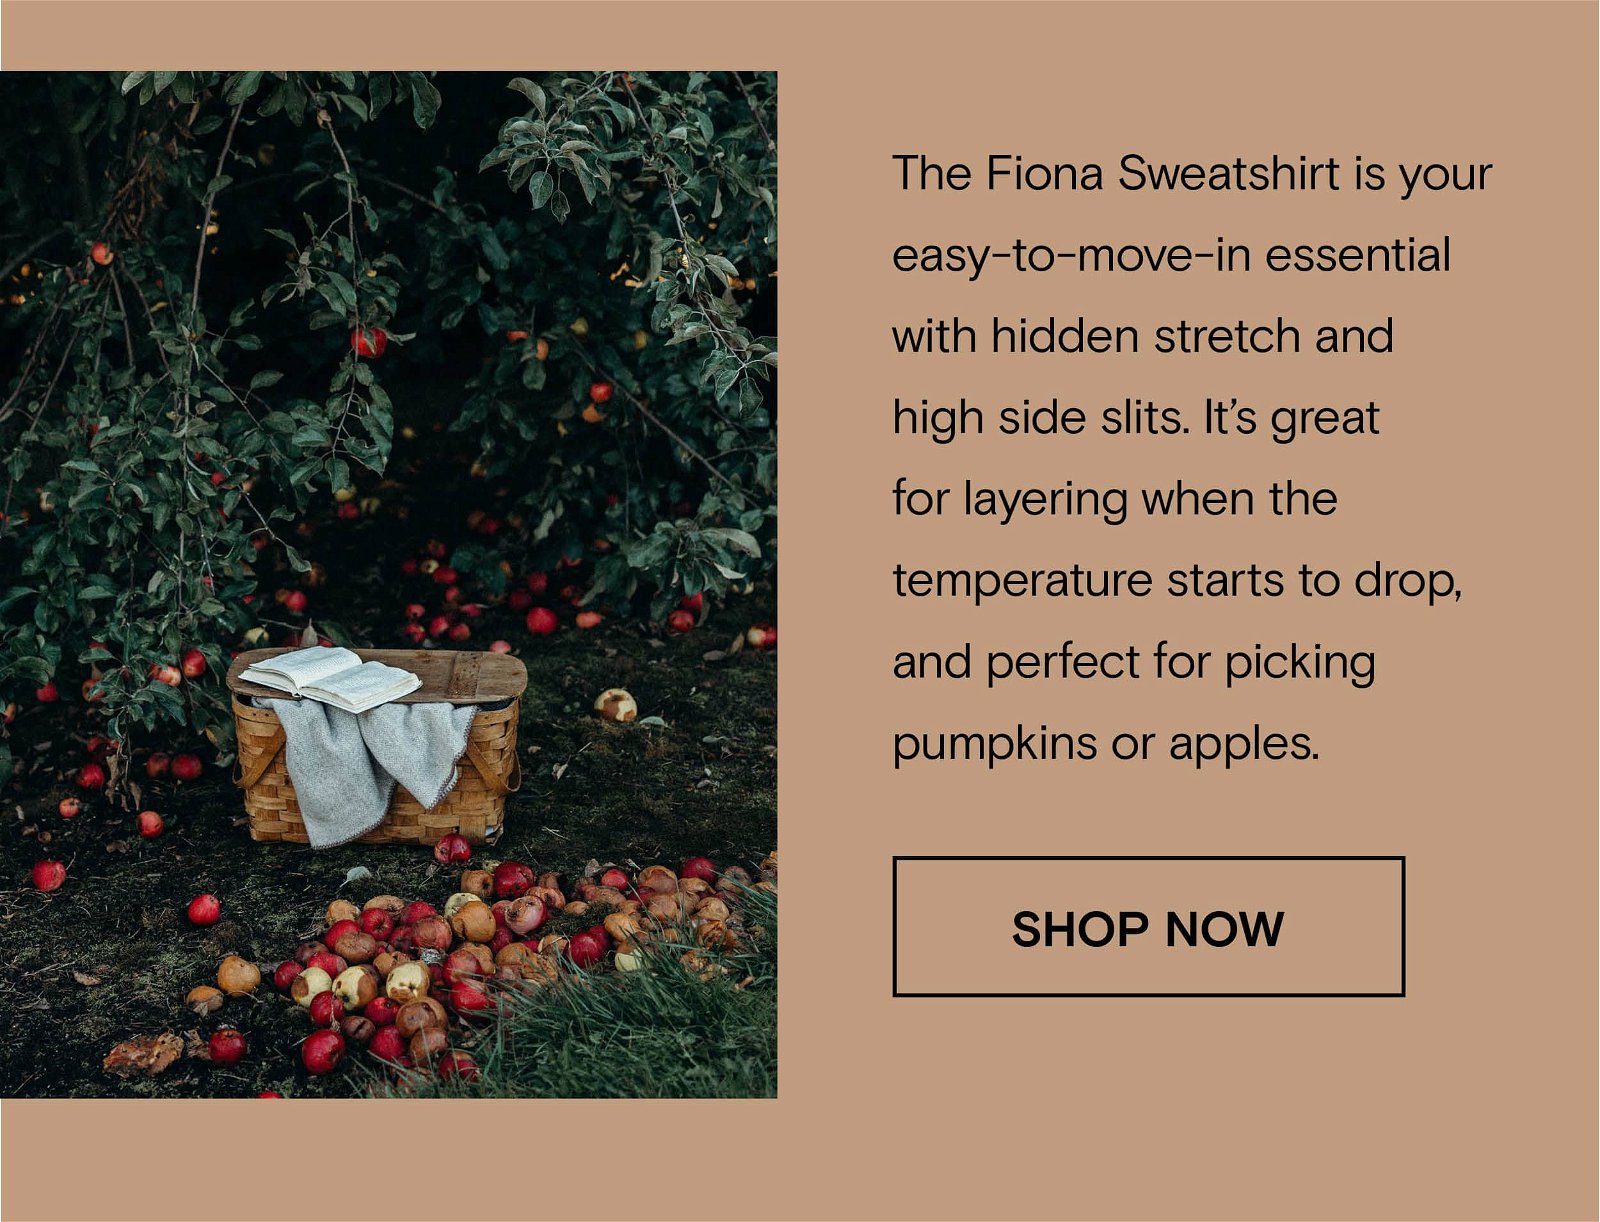 The Fiona Sweatshirt is your easy-to-move-in essential with hidden stretch and high side slits. It's great for layering when the temperature starts to drop, and perfect for picking pumpkins or apples.